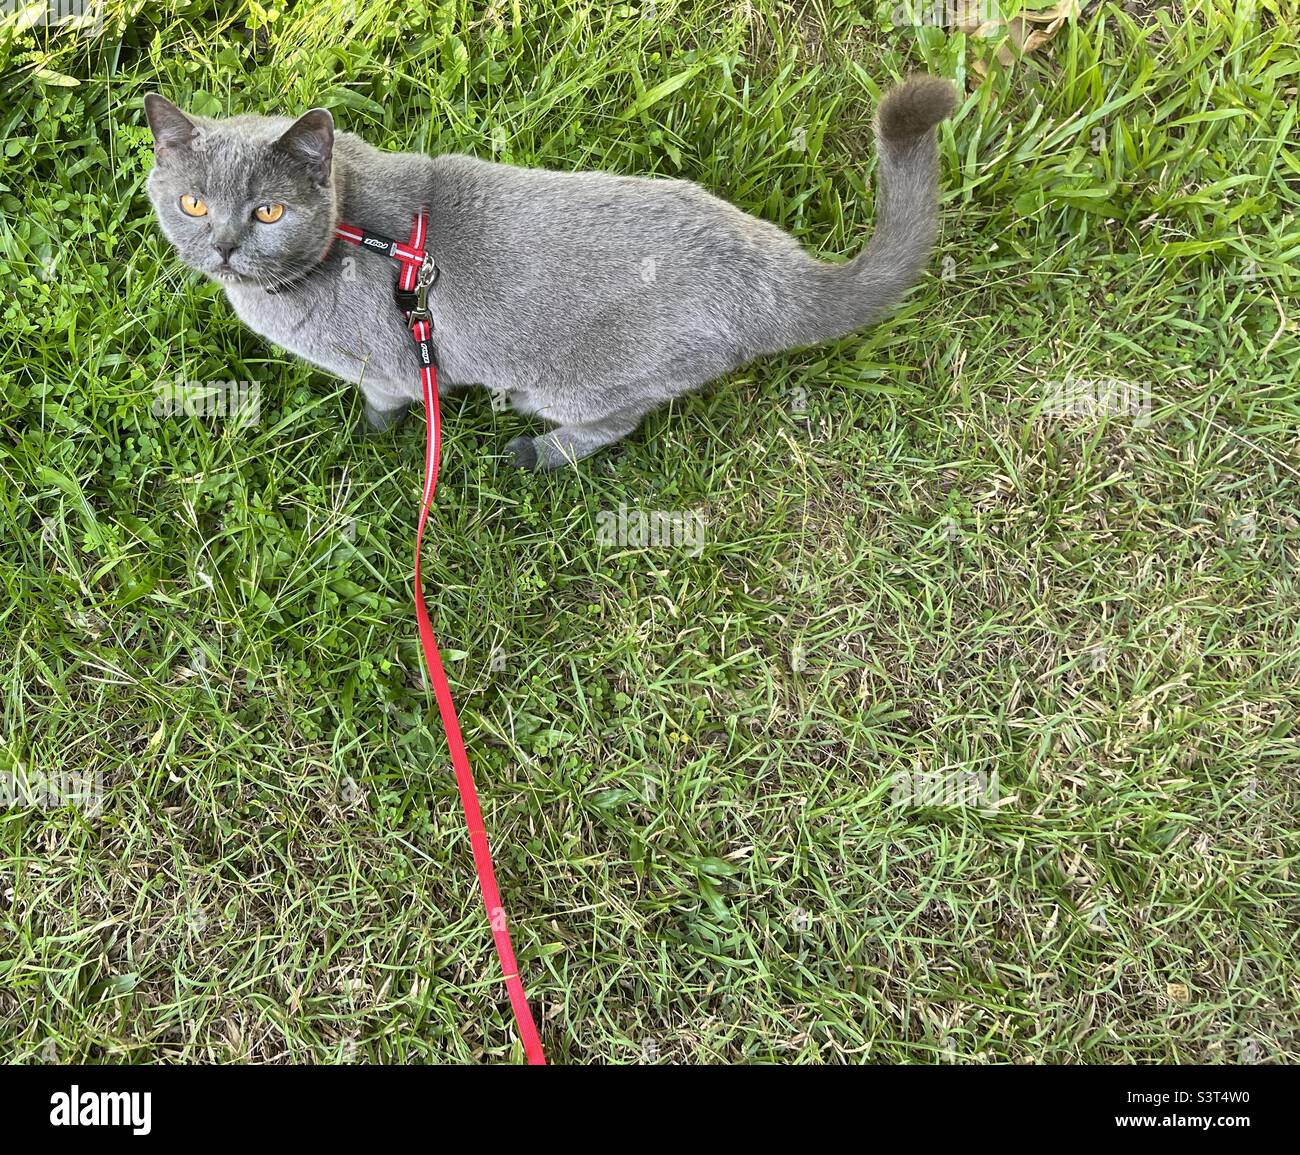 Cat on a leash outdoor Stock Photo